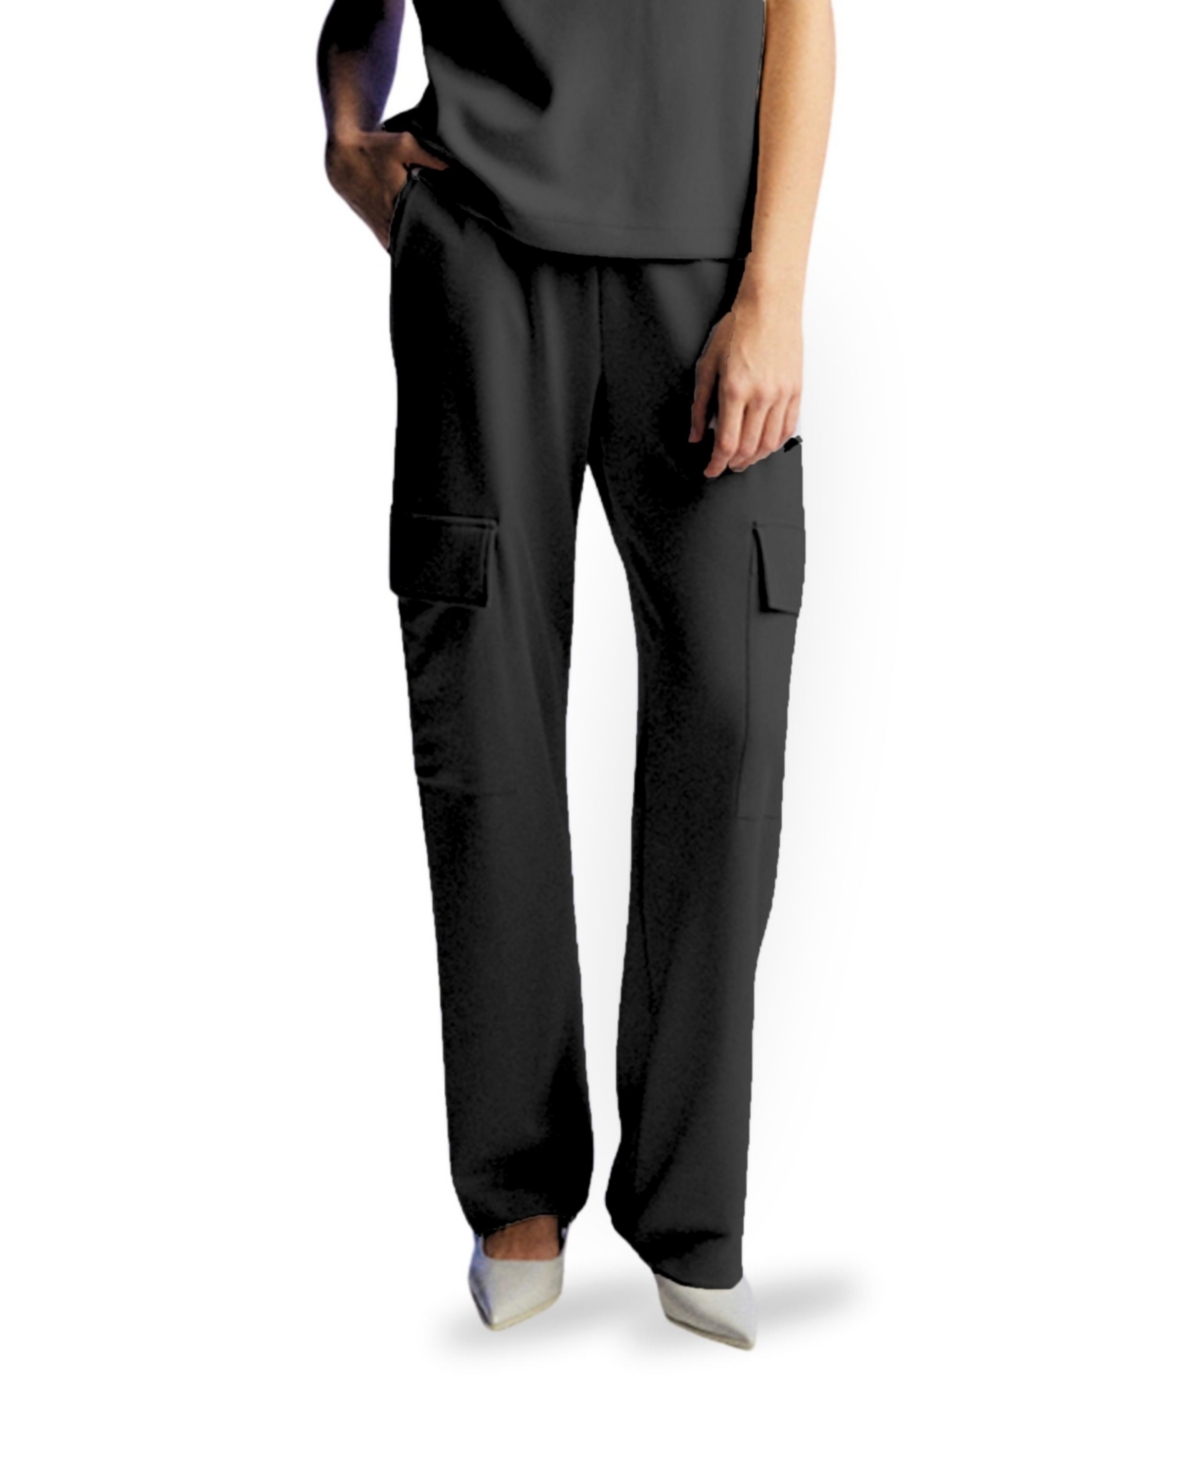 Women's Pants with Pockets - Stone